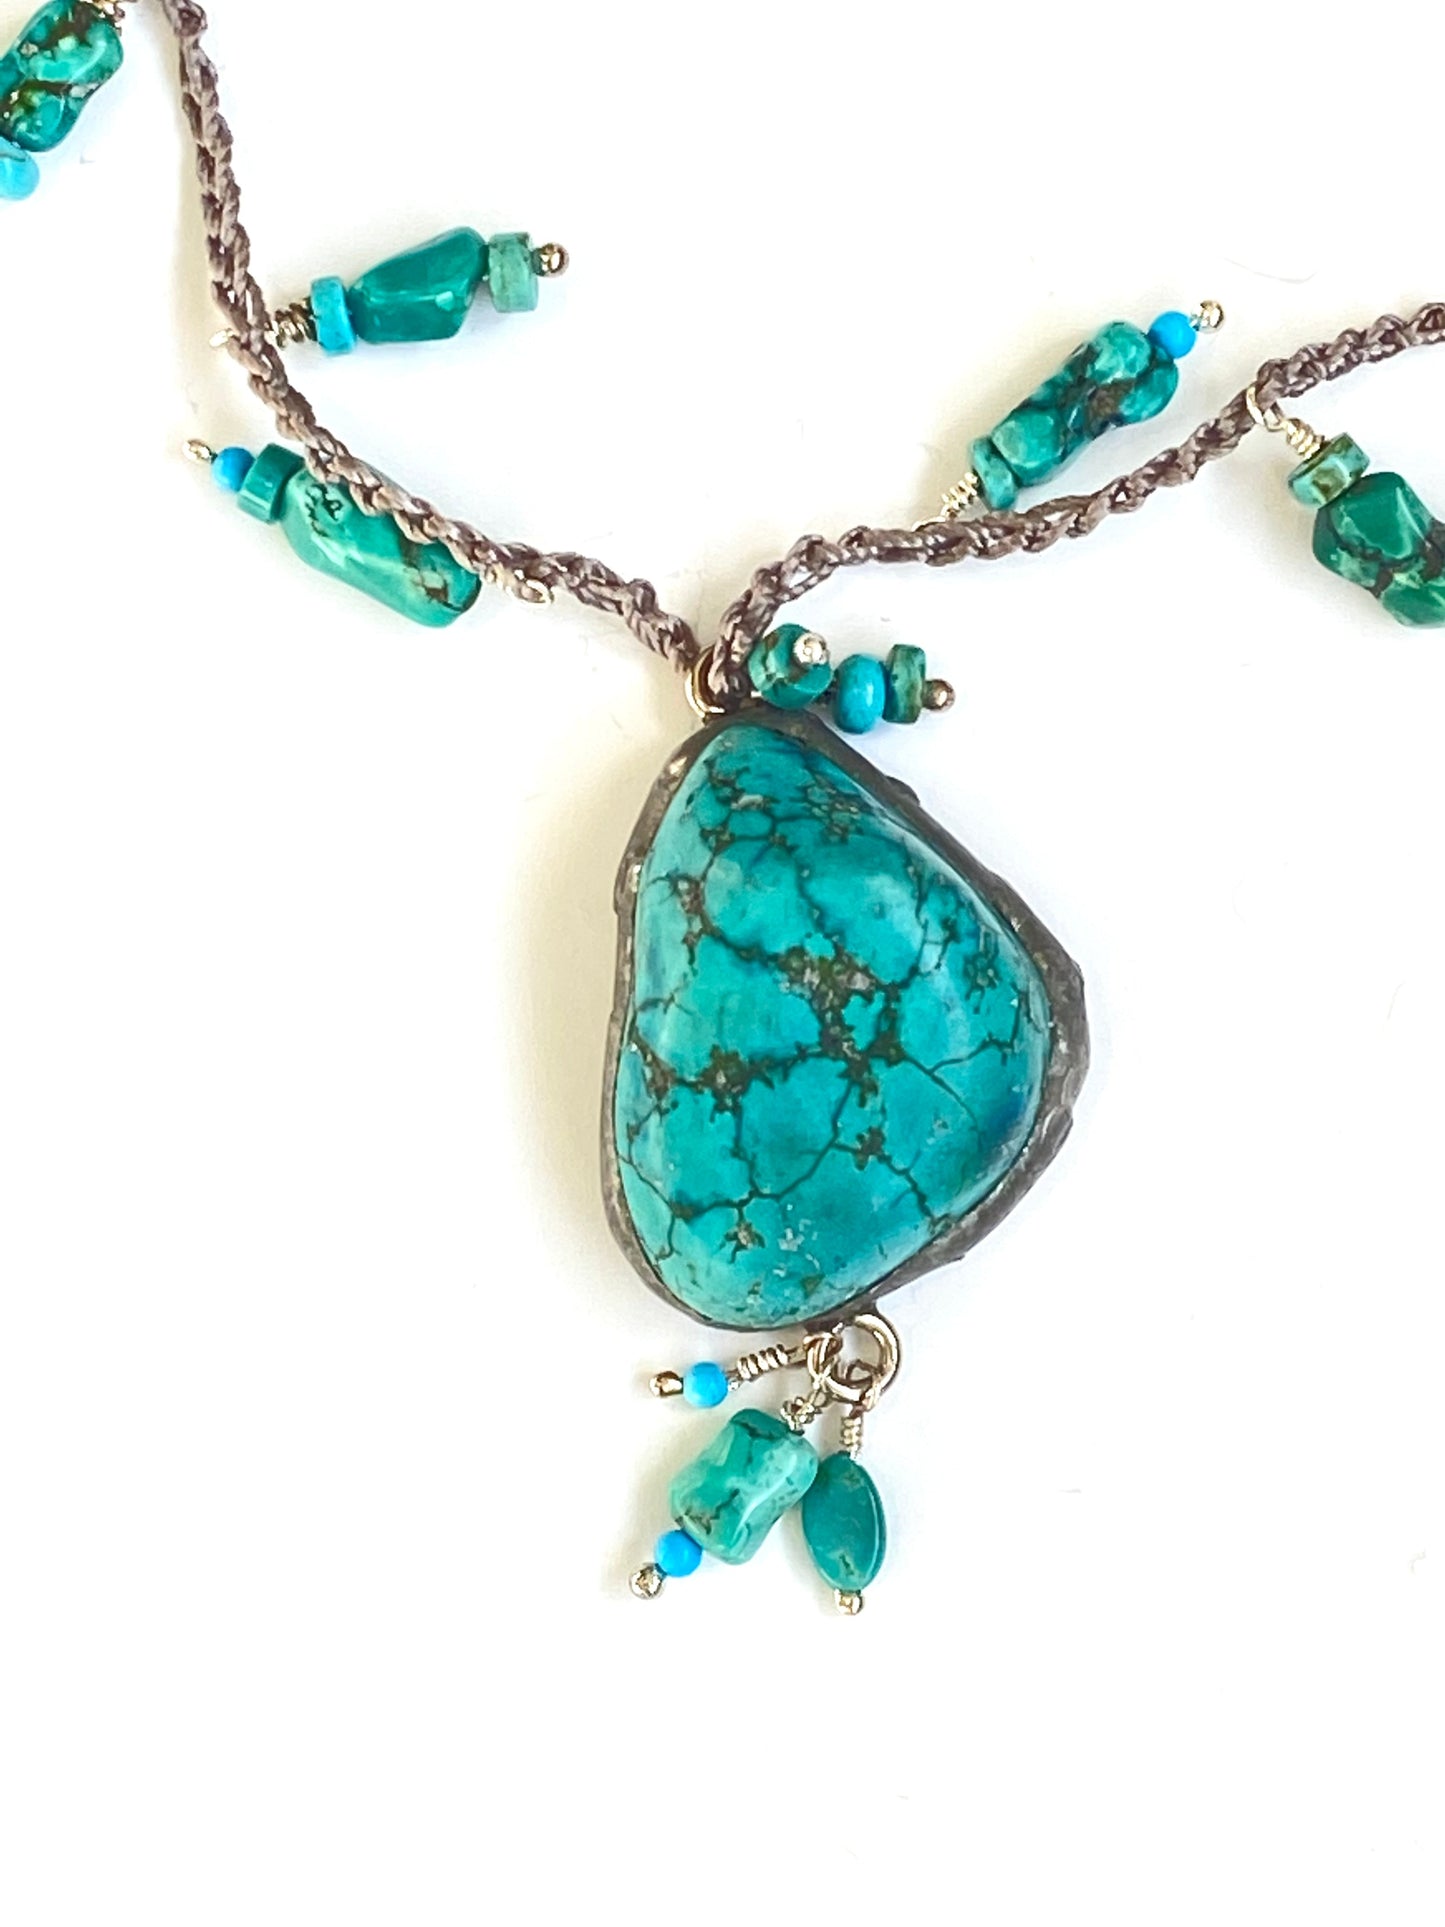 Real Turquoise adjustable crocheted necklaces